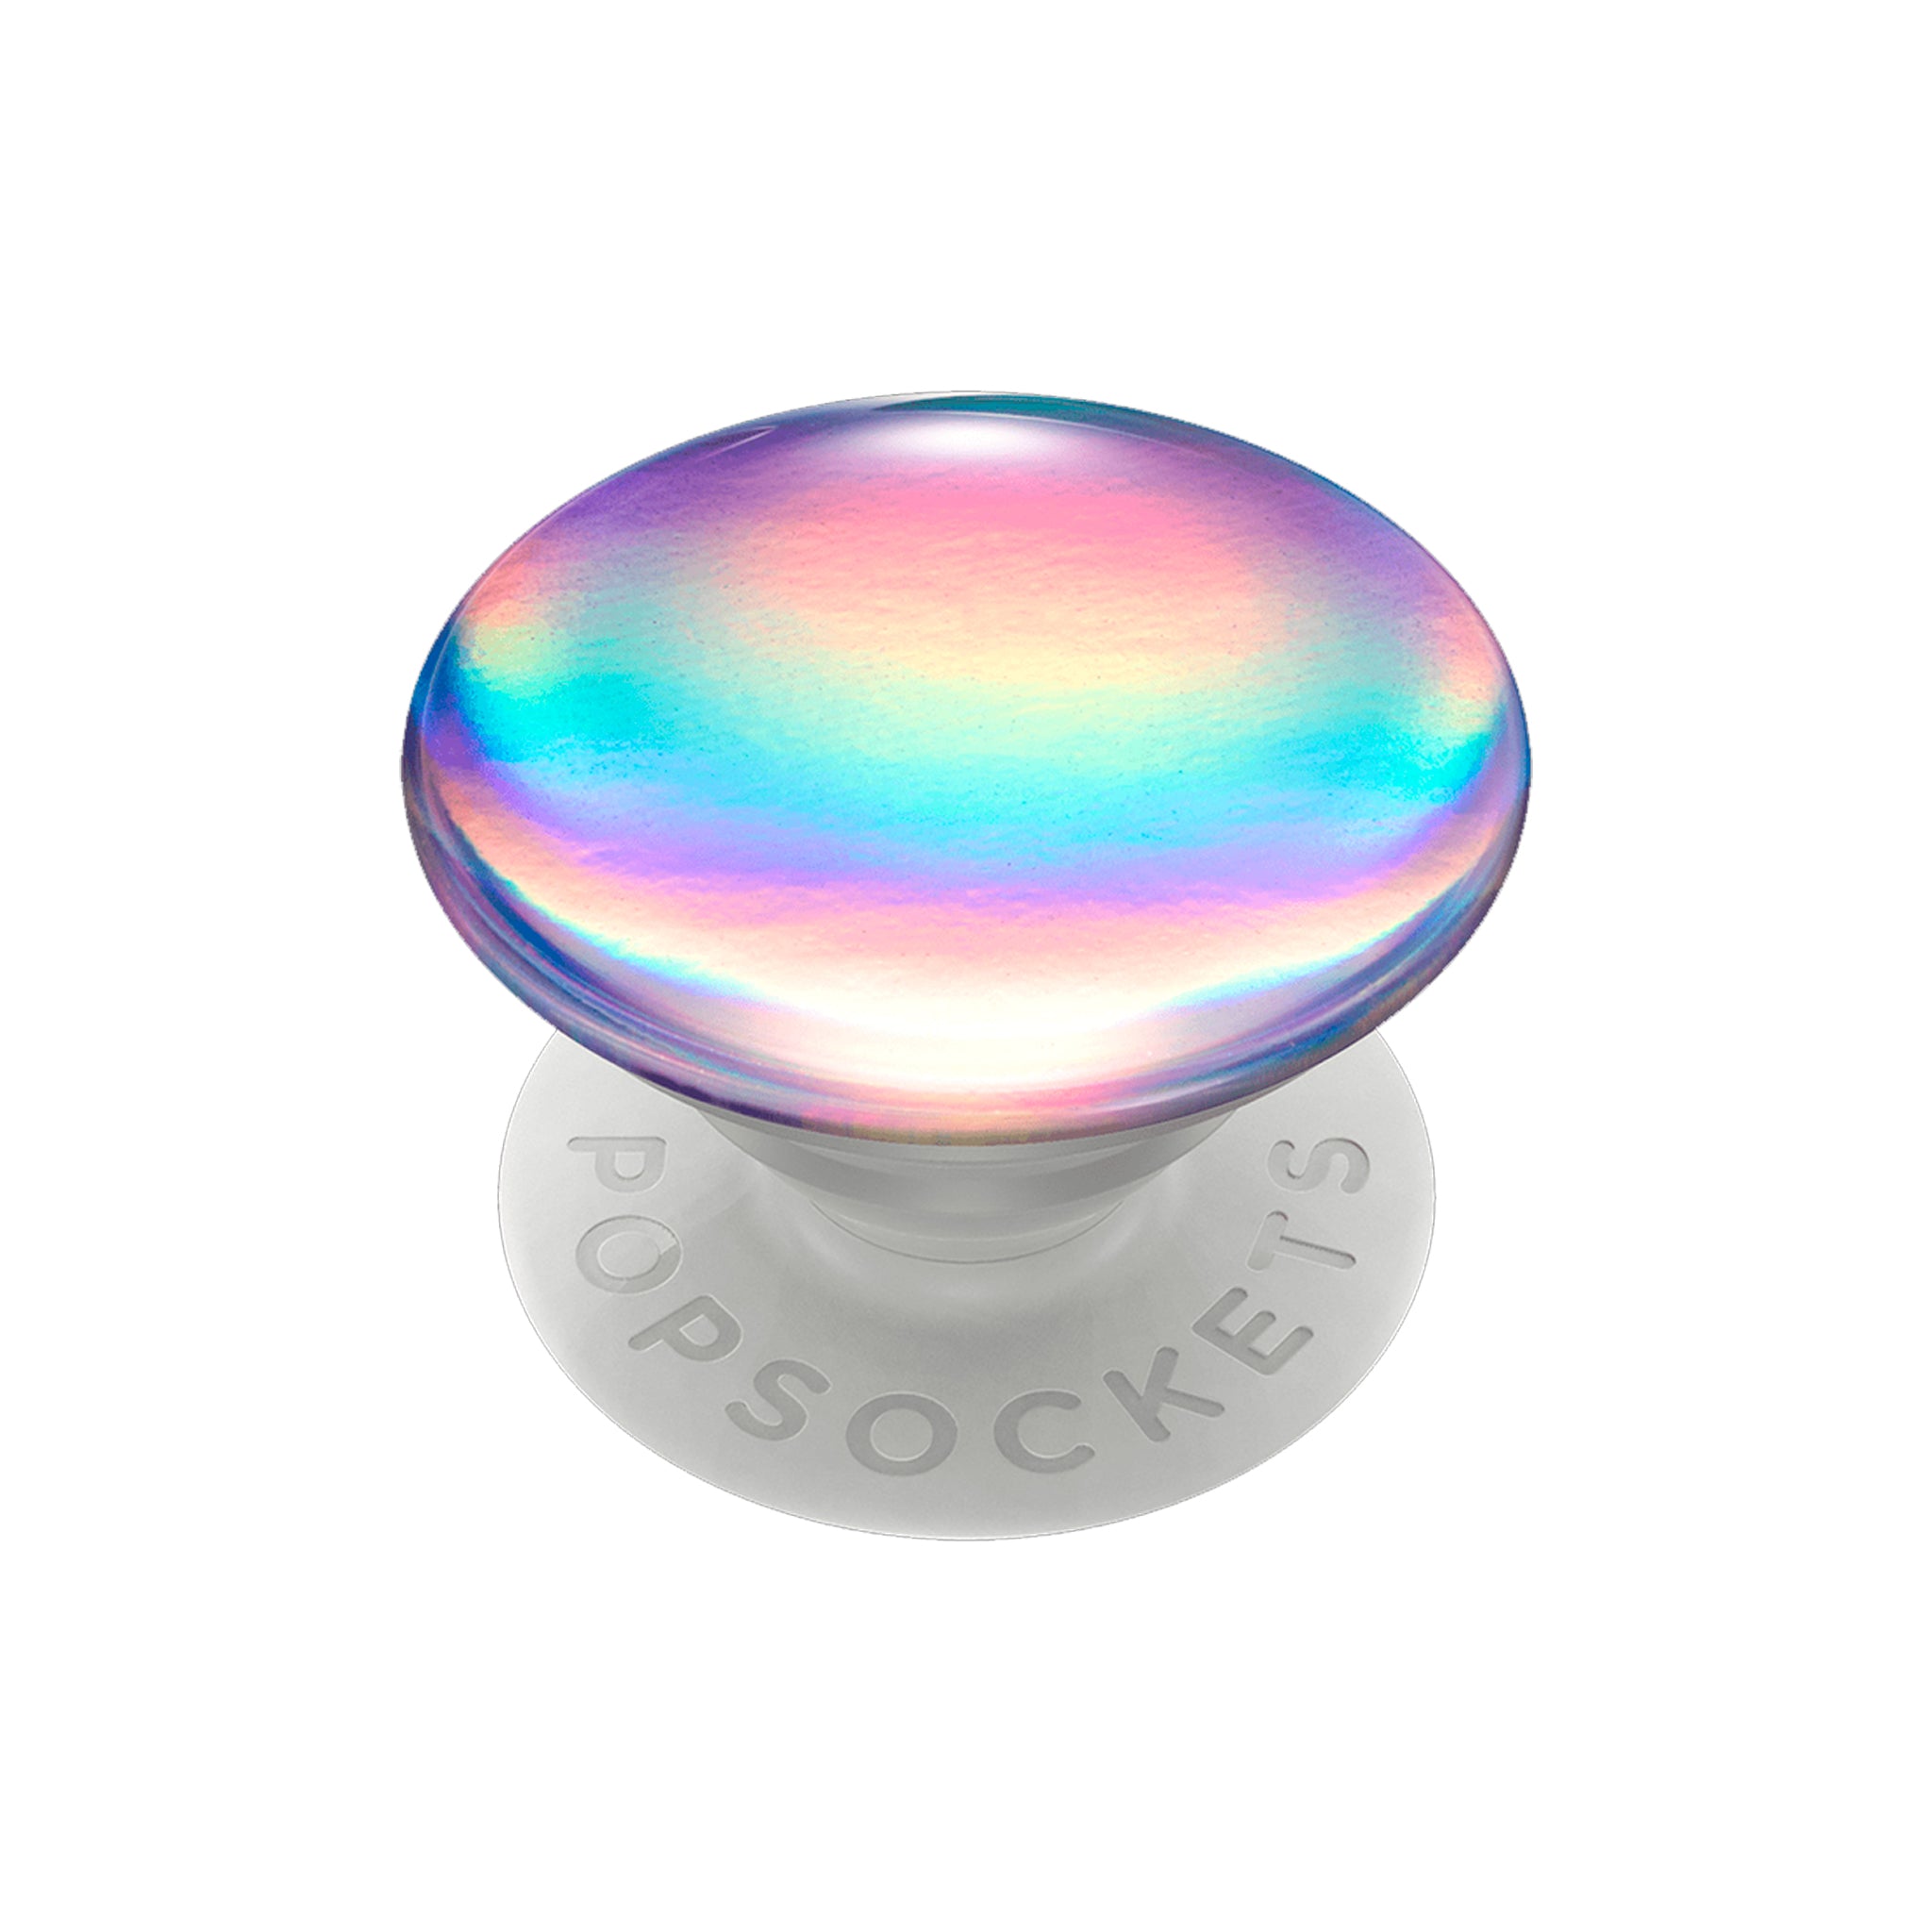 Popsockets - Popgrip Swappable Abstract Device Stand And Grip - Rainbow Orb Gloss